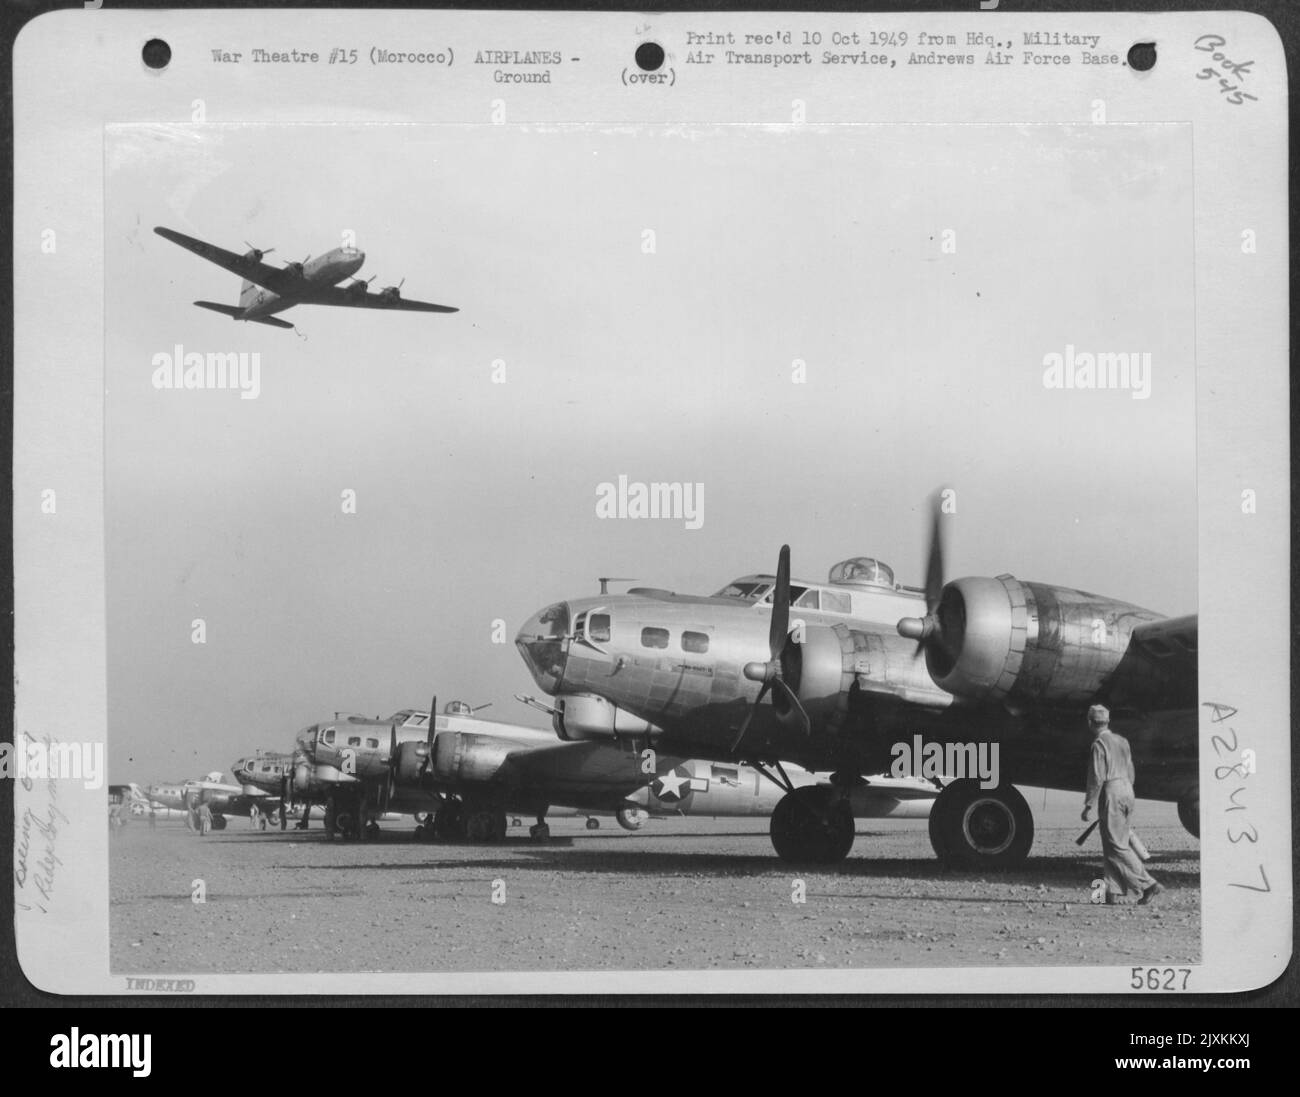 GOING HOME--Boeing B-17's, only a few months ago plaguing Naziland, line up at Marrakech, French Morocco, on their first step home. More than 2,500 bombers have flown through Marrakech, main channel of aircraft redeployment, since V-E Day. Stock Photo